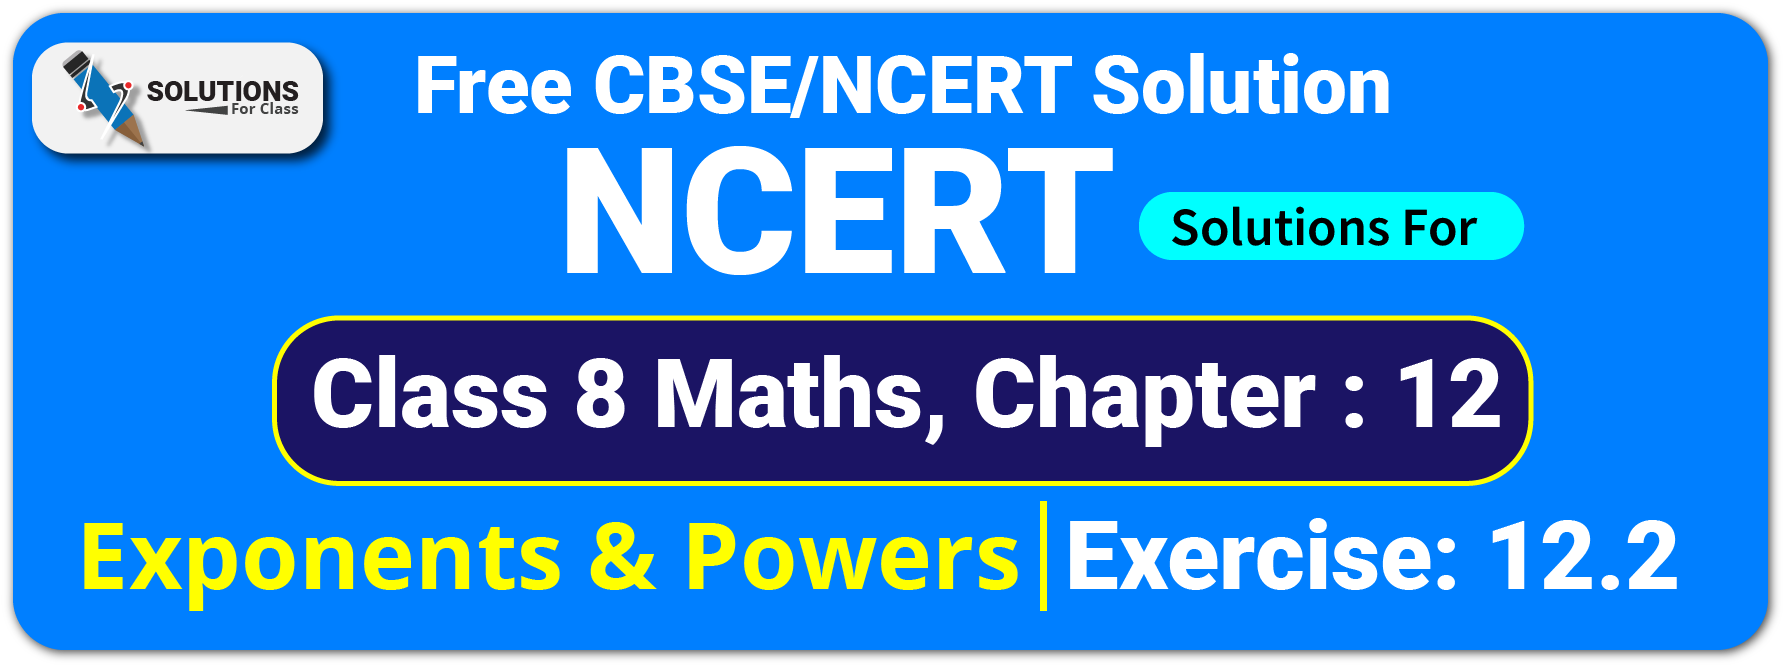 NCERT Solutions For Class 8 Chapter 12, Exponents and Powers, Exercise12.2